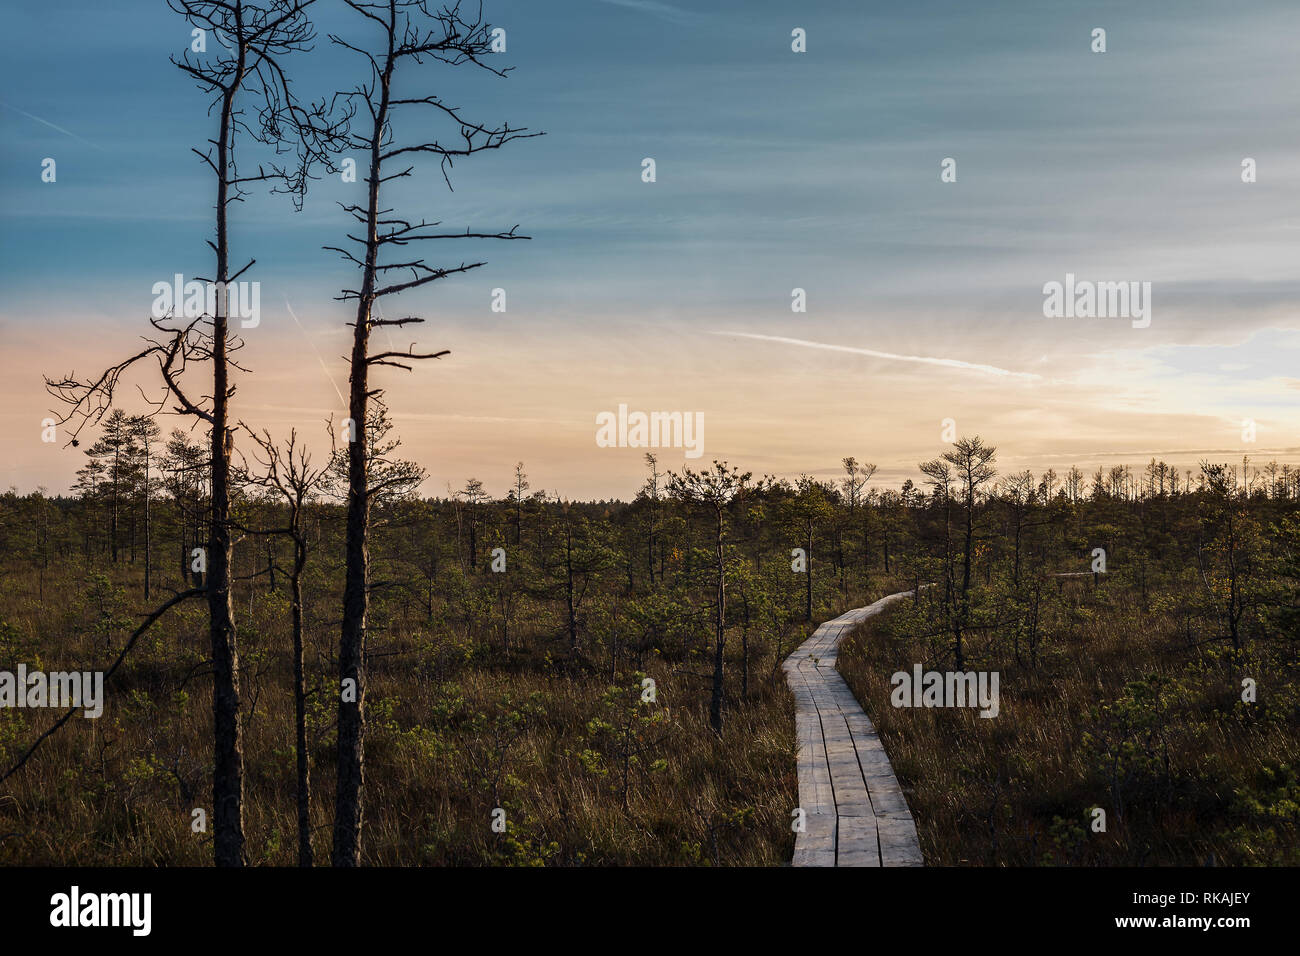 Swamp at sunset in Latvia. Apocalyptic feeling hiking on a wooden trail through the bog with dark clouds. Stock Photo